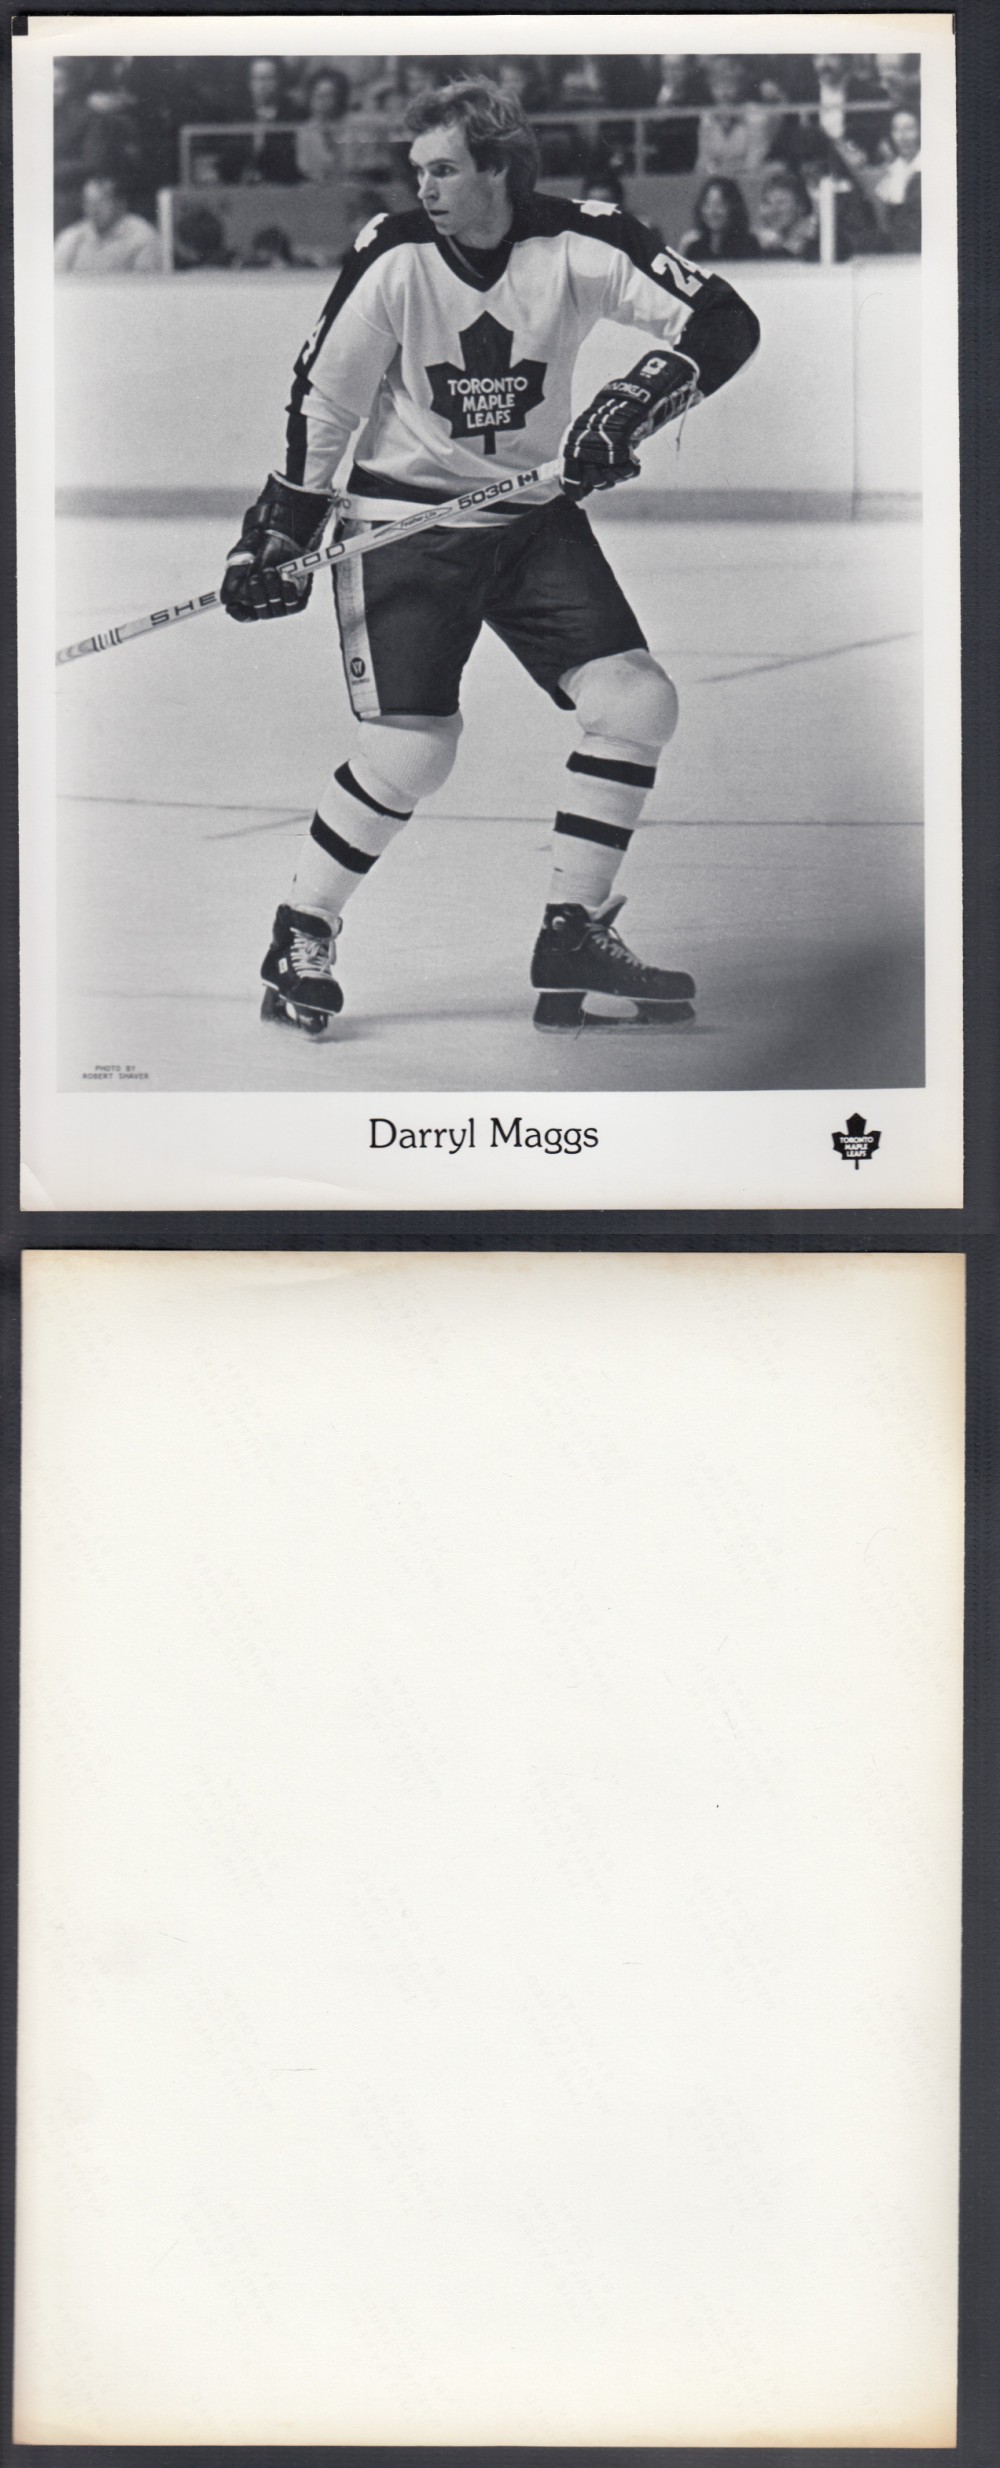 EARLY 1980'S TORONTO MAPLE LEAFS MEDIA PHOTO D. MAGGS photo